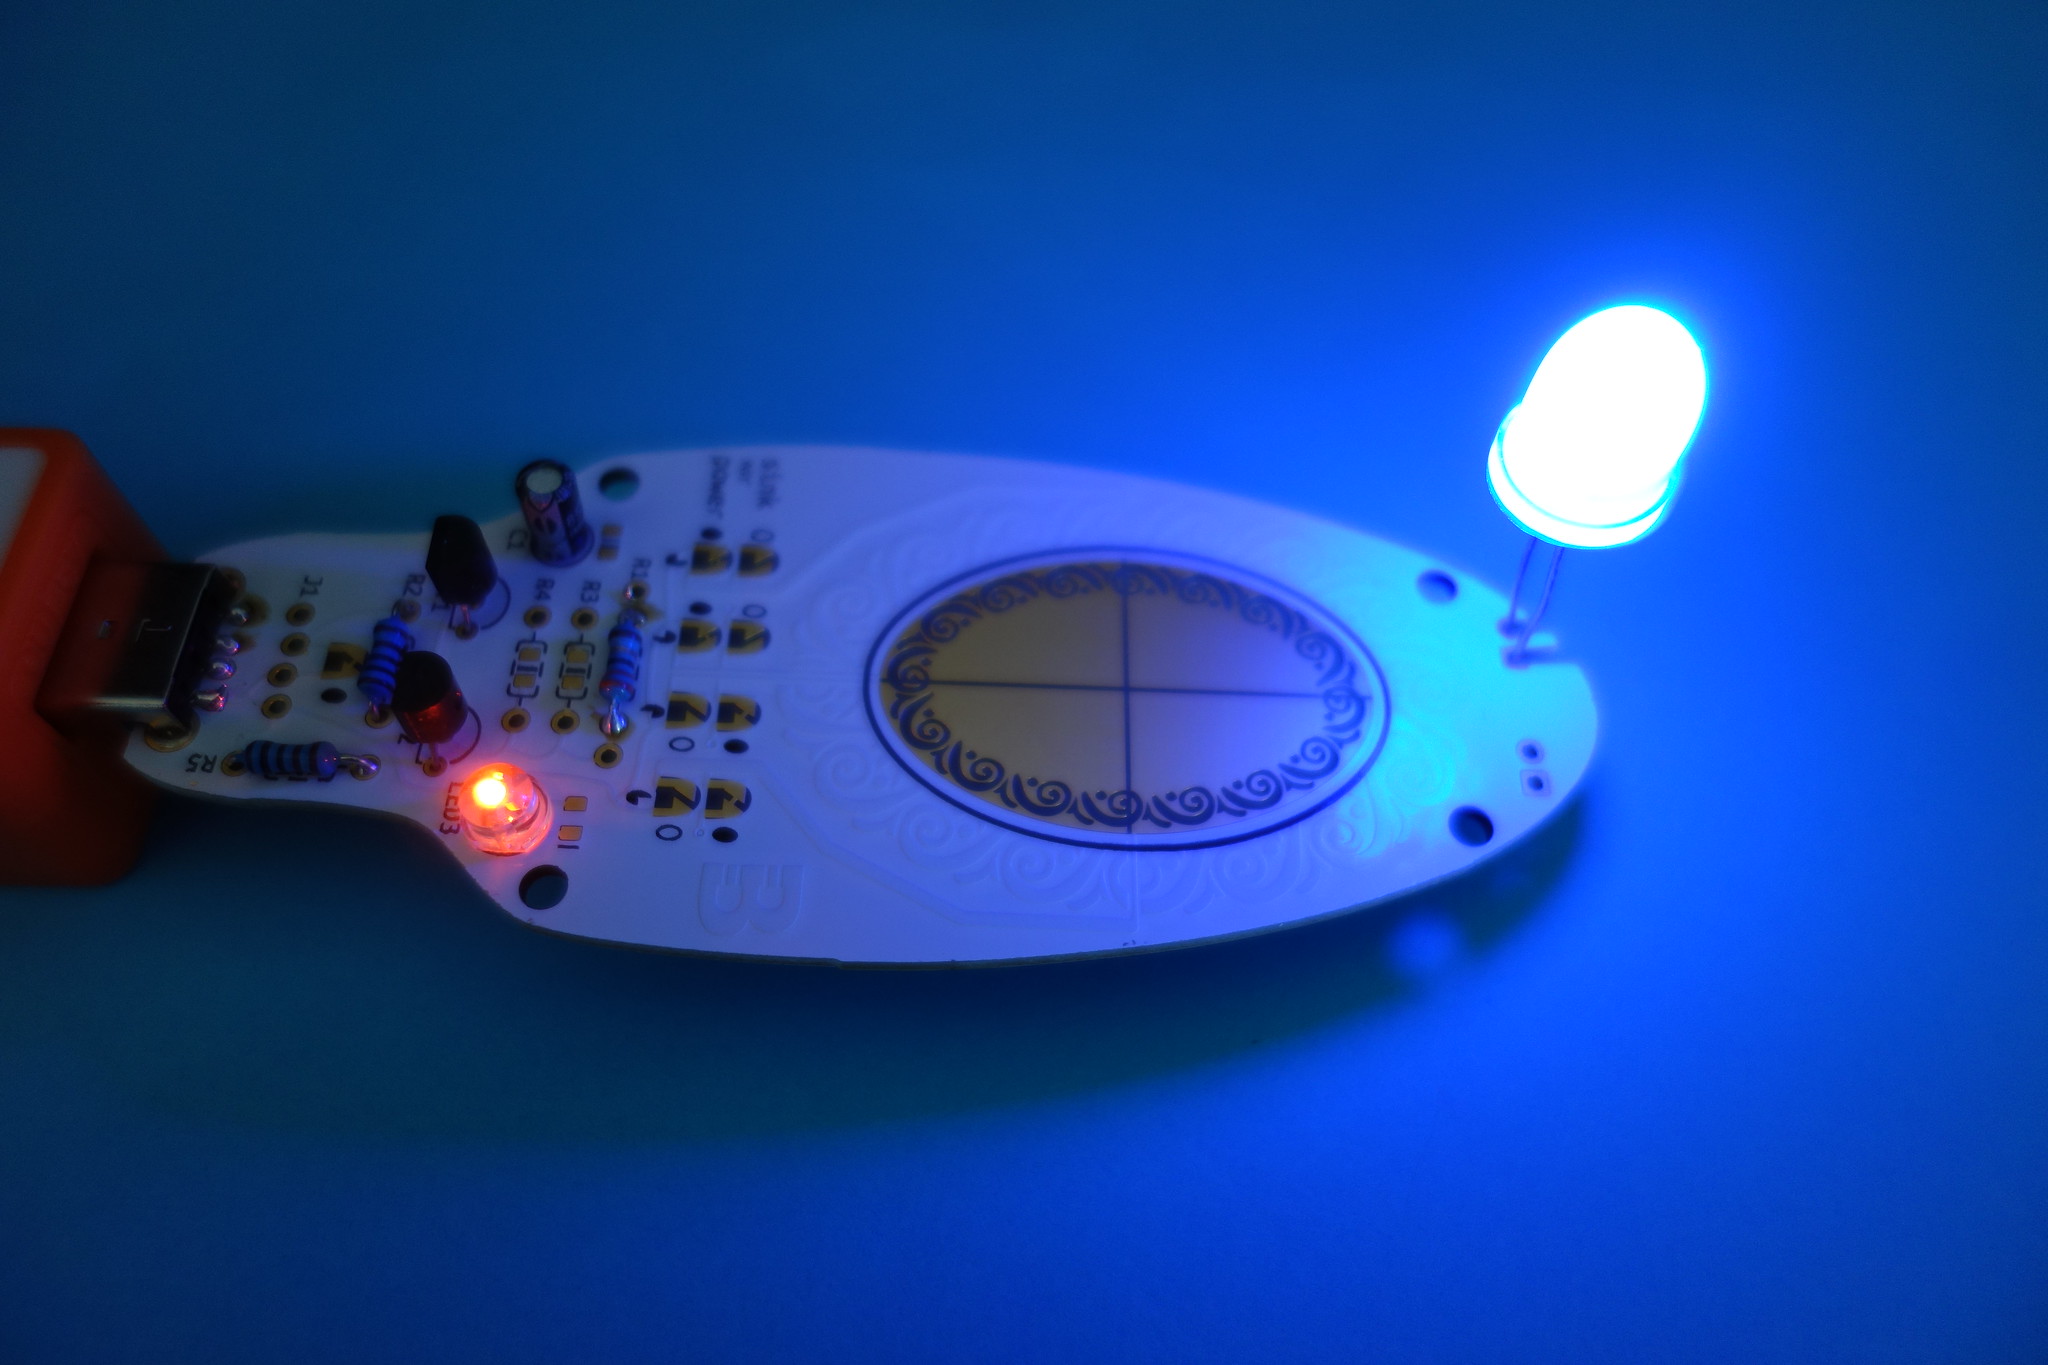 An awesome LED tester